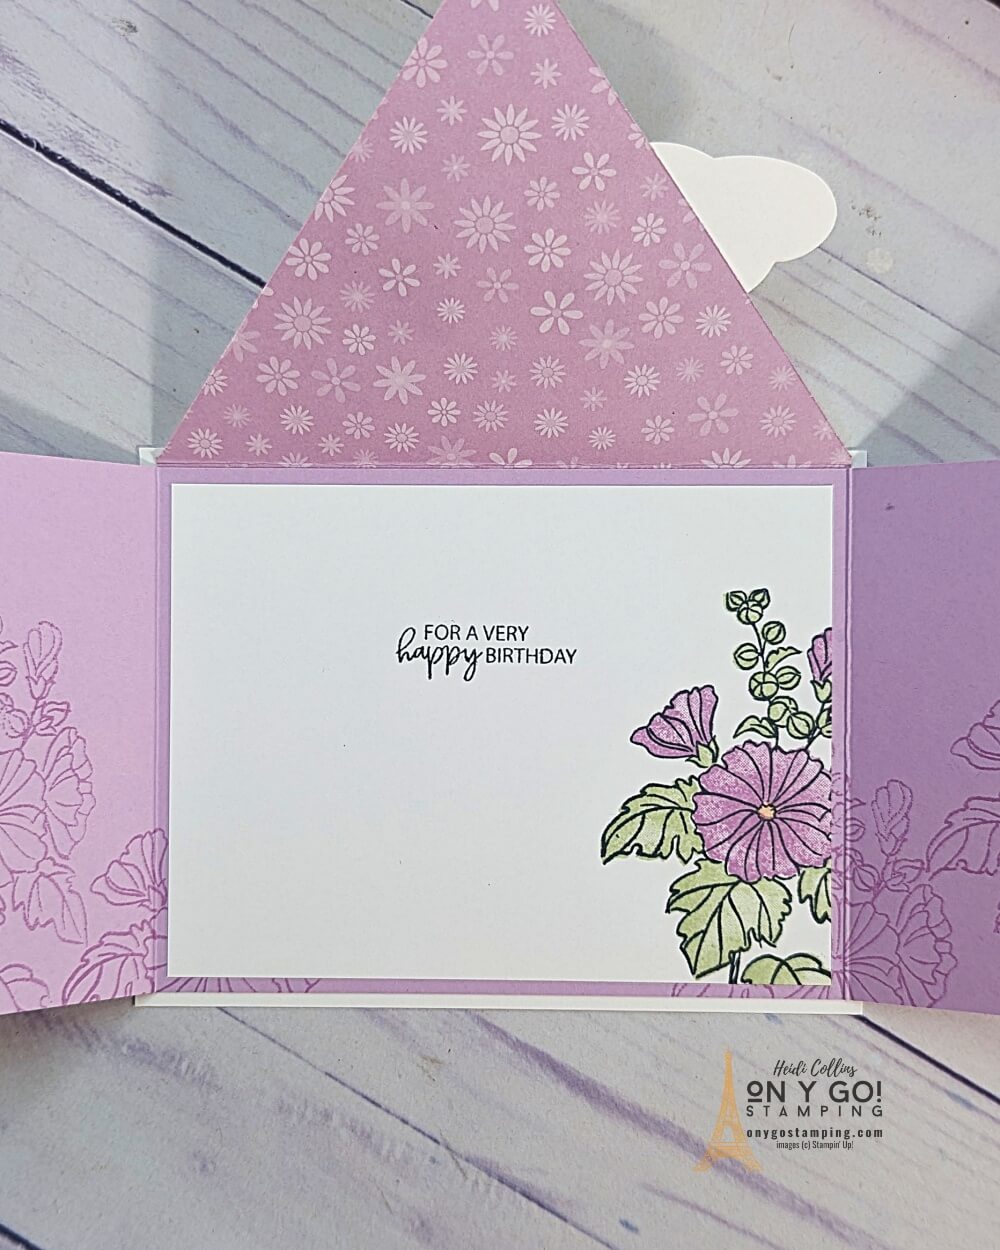 Envelope closure fun fold card using the Beautifully Happy stamp set and Dandy Designs patterned paper from Stampin' Up! Get both of these free during Sale-A-Bration 2023.